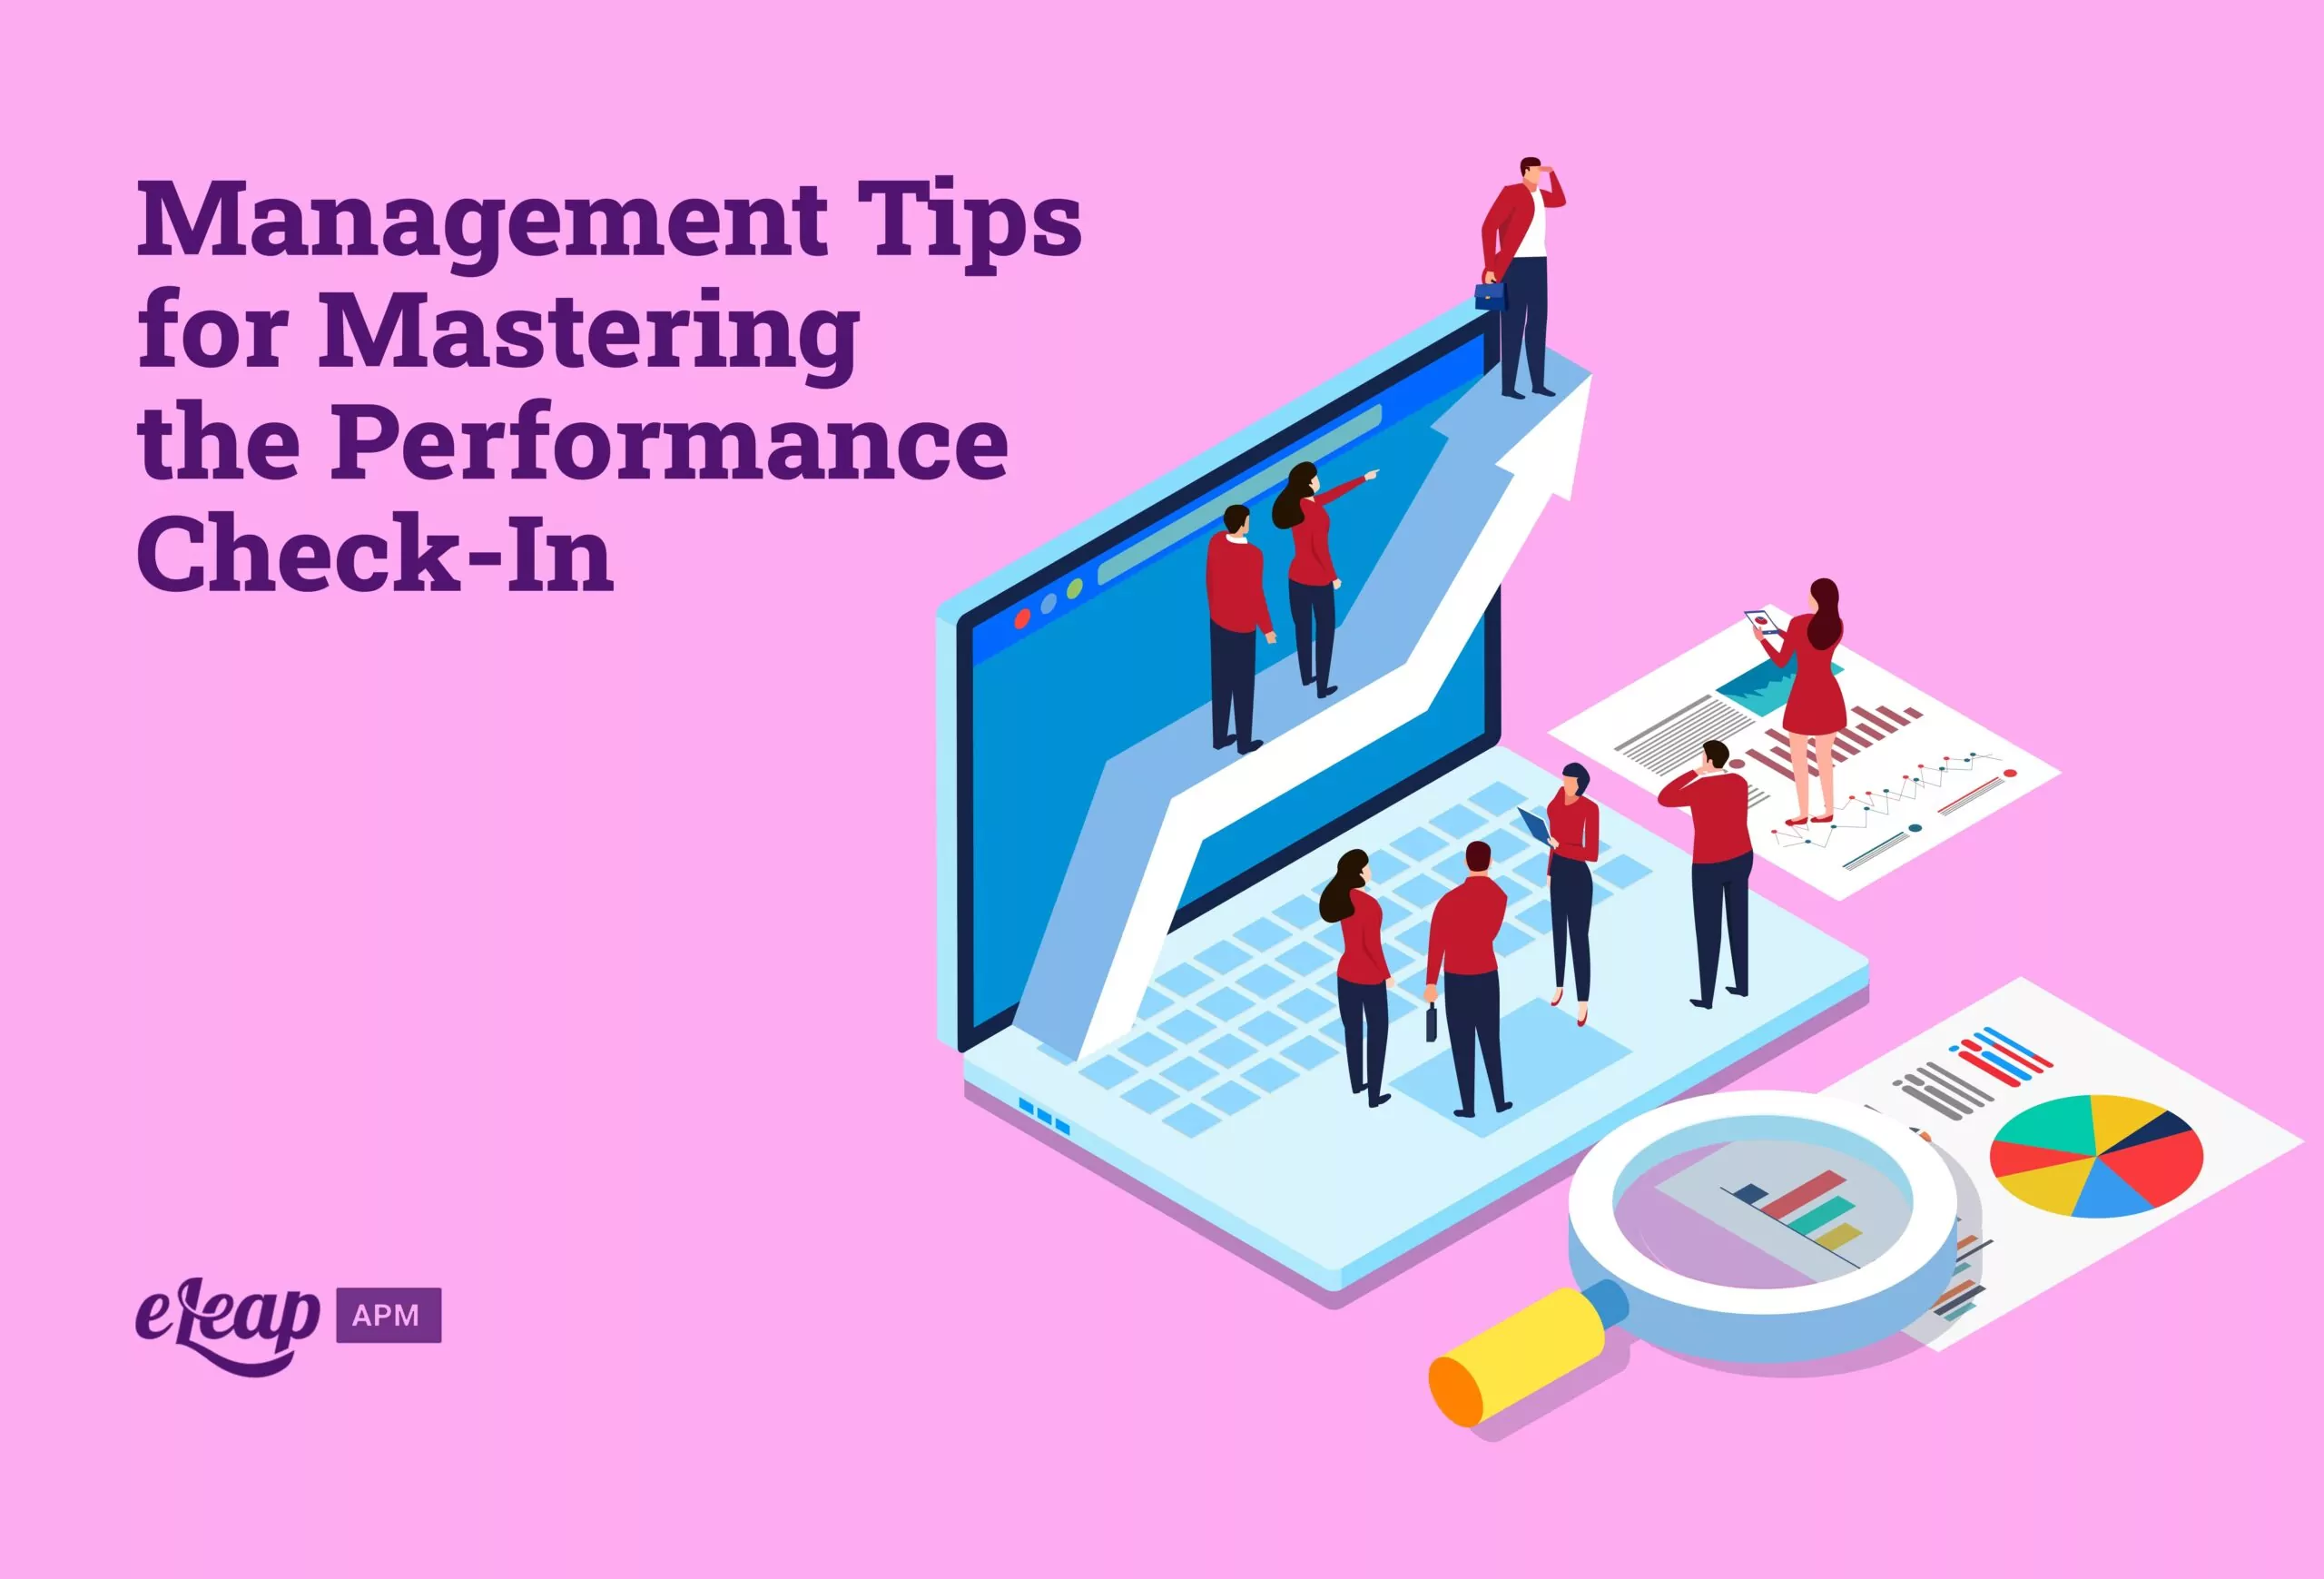 Management Tips for Mastering the Performance Check-In